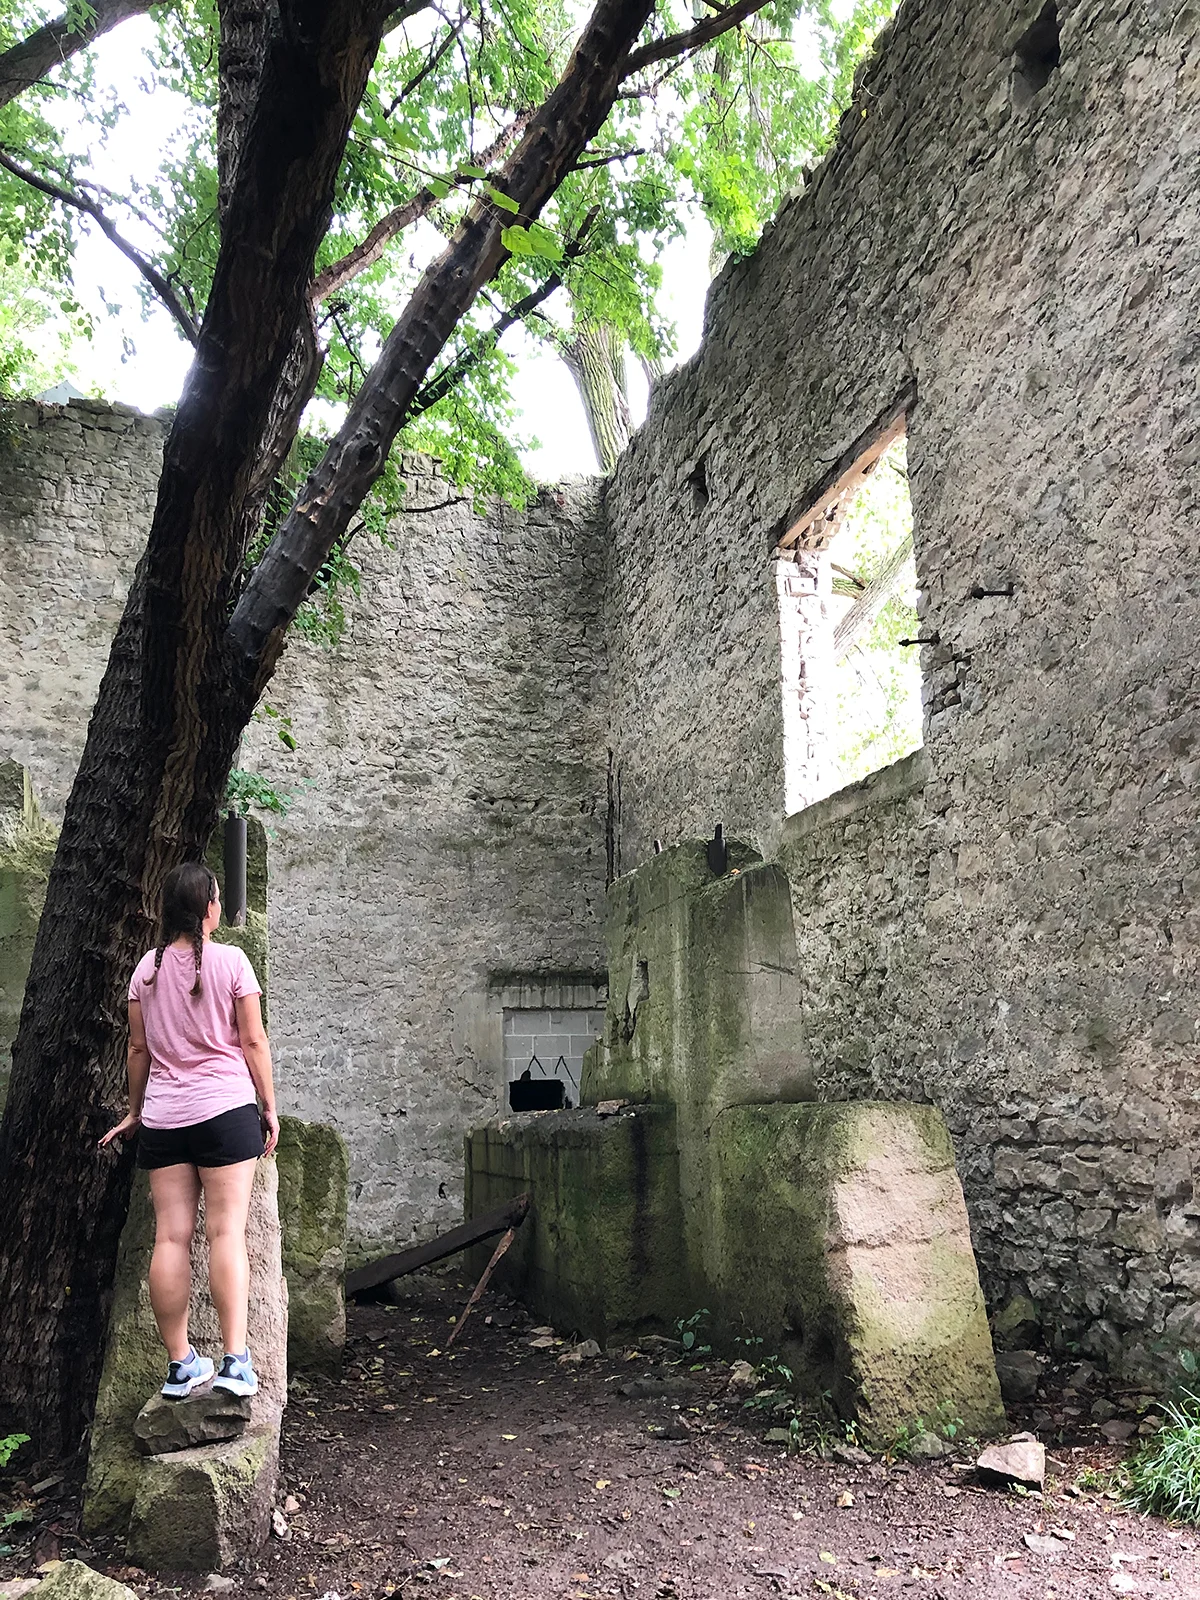 things to do on Kelleys island standing near tree in old ruins woman with pink shirt black shorts